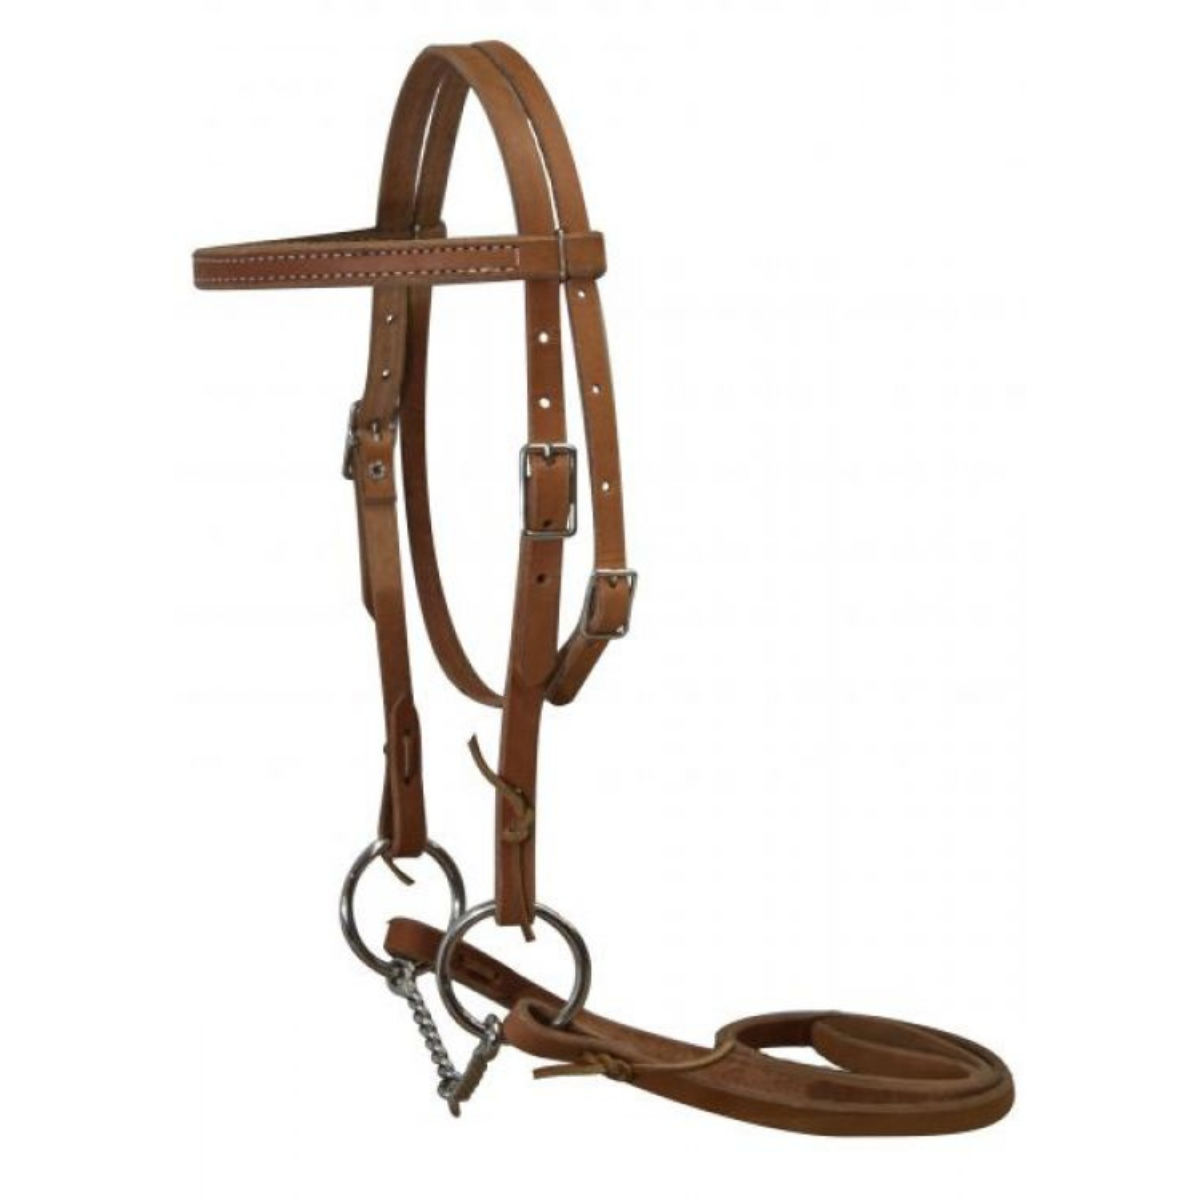 Double stitched pony bridle complete with twisted wire snaffle bit and reins - Double T Saddles